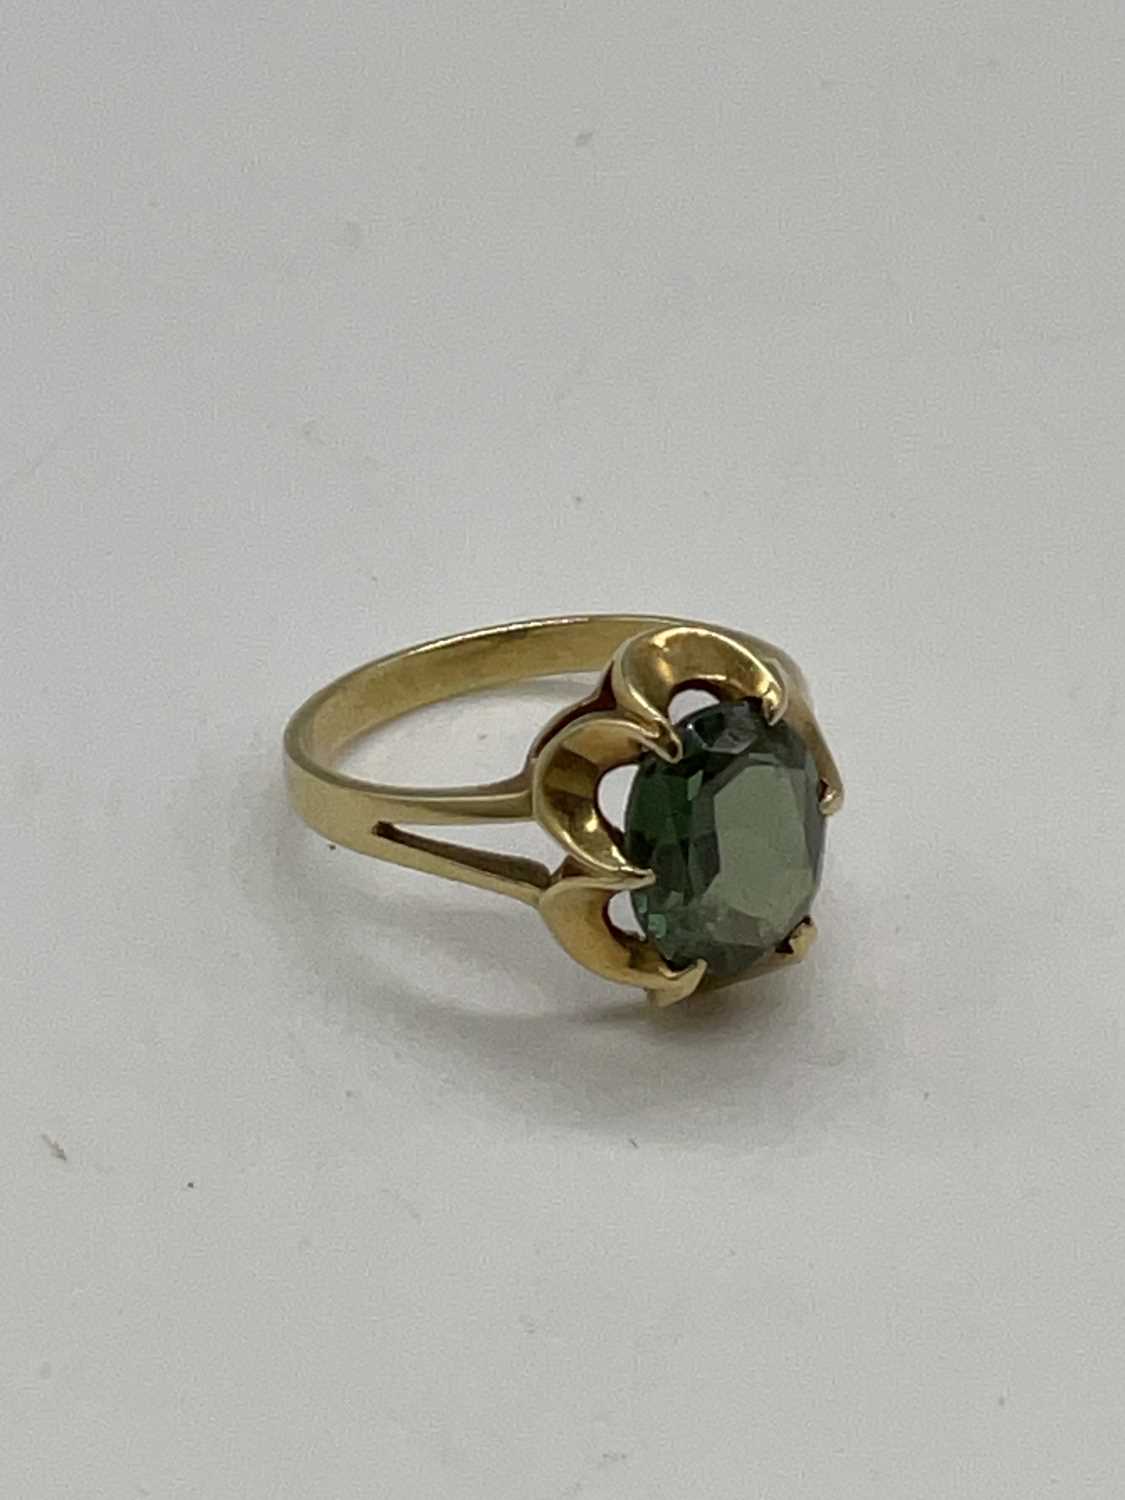 A 14ct yellow gold dress ring set with pale green stone (possible chrome tourmaline), size N,